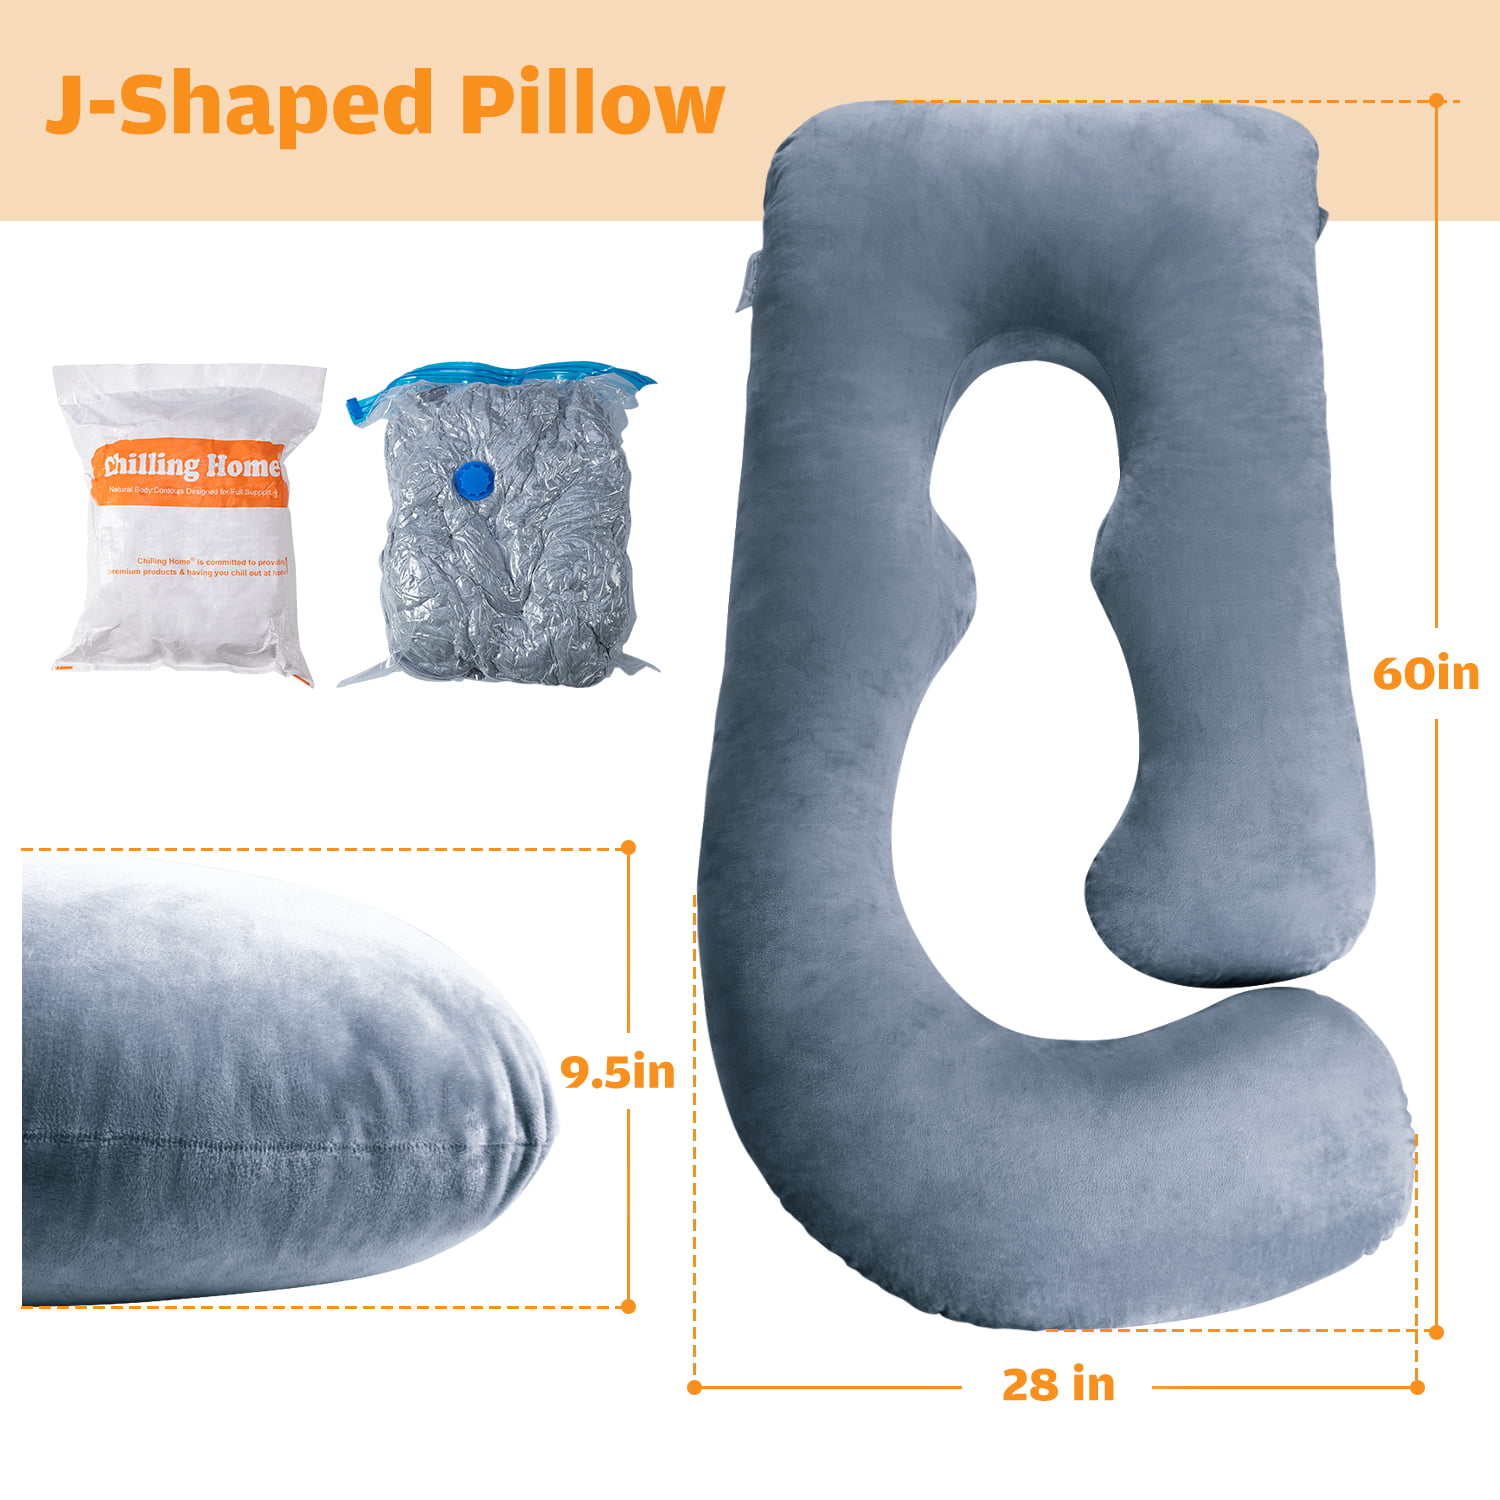 55 inch Full Body Pillow Long Pillows for Sleeping Chilling Home Pregnancy Pillows for Sleeping 2 in 1 U Shaped Maternity Pillow Cuddle Pillow Maternity & Body Pillows for adults with Cover Jersey 